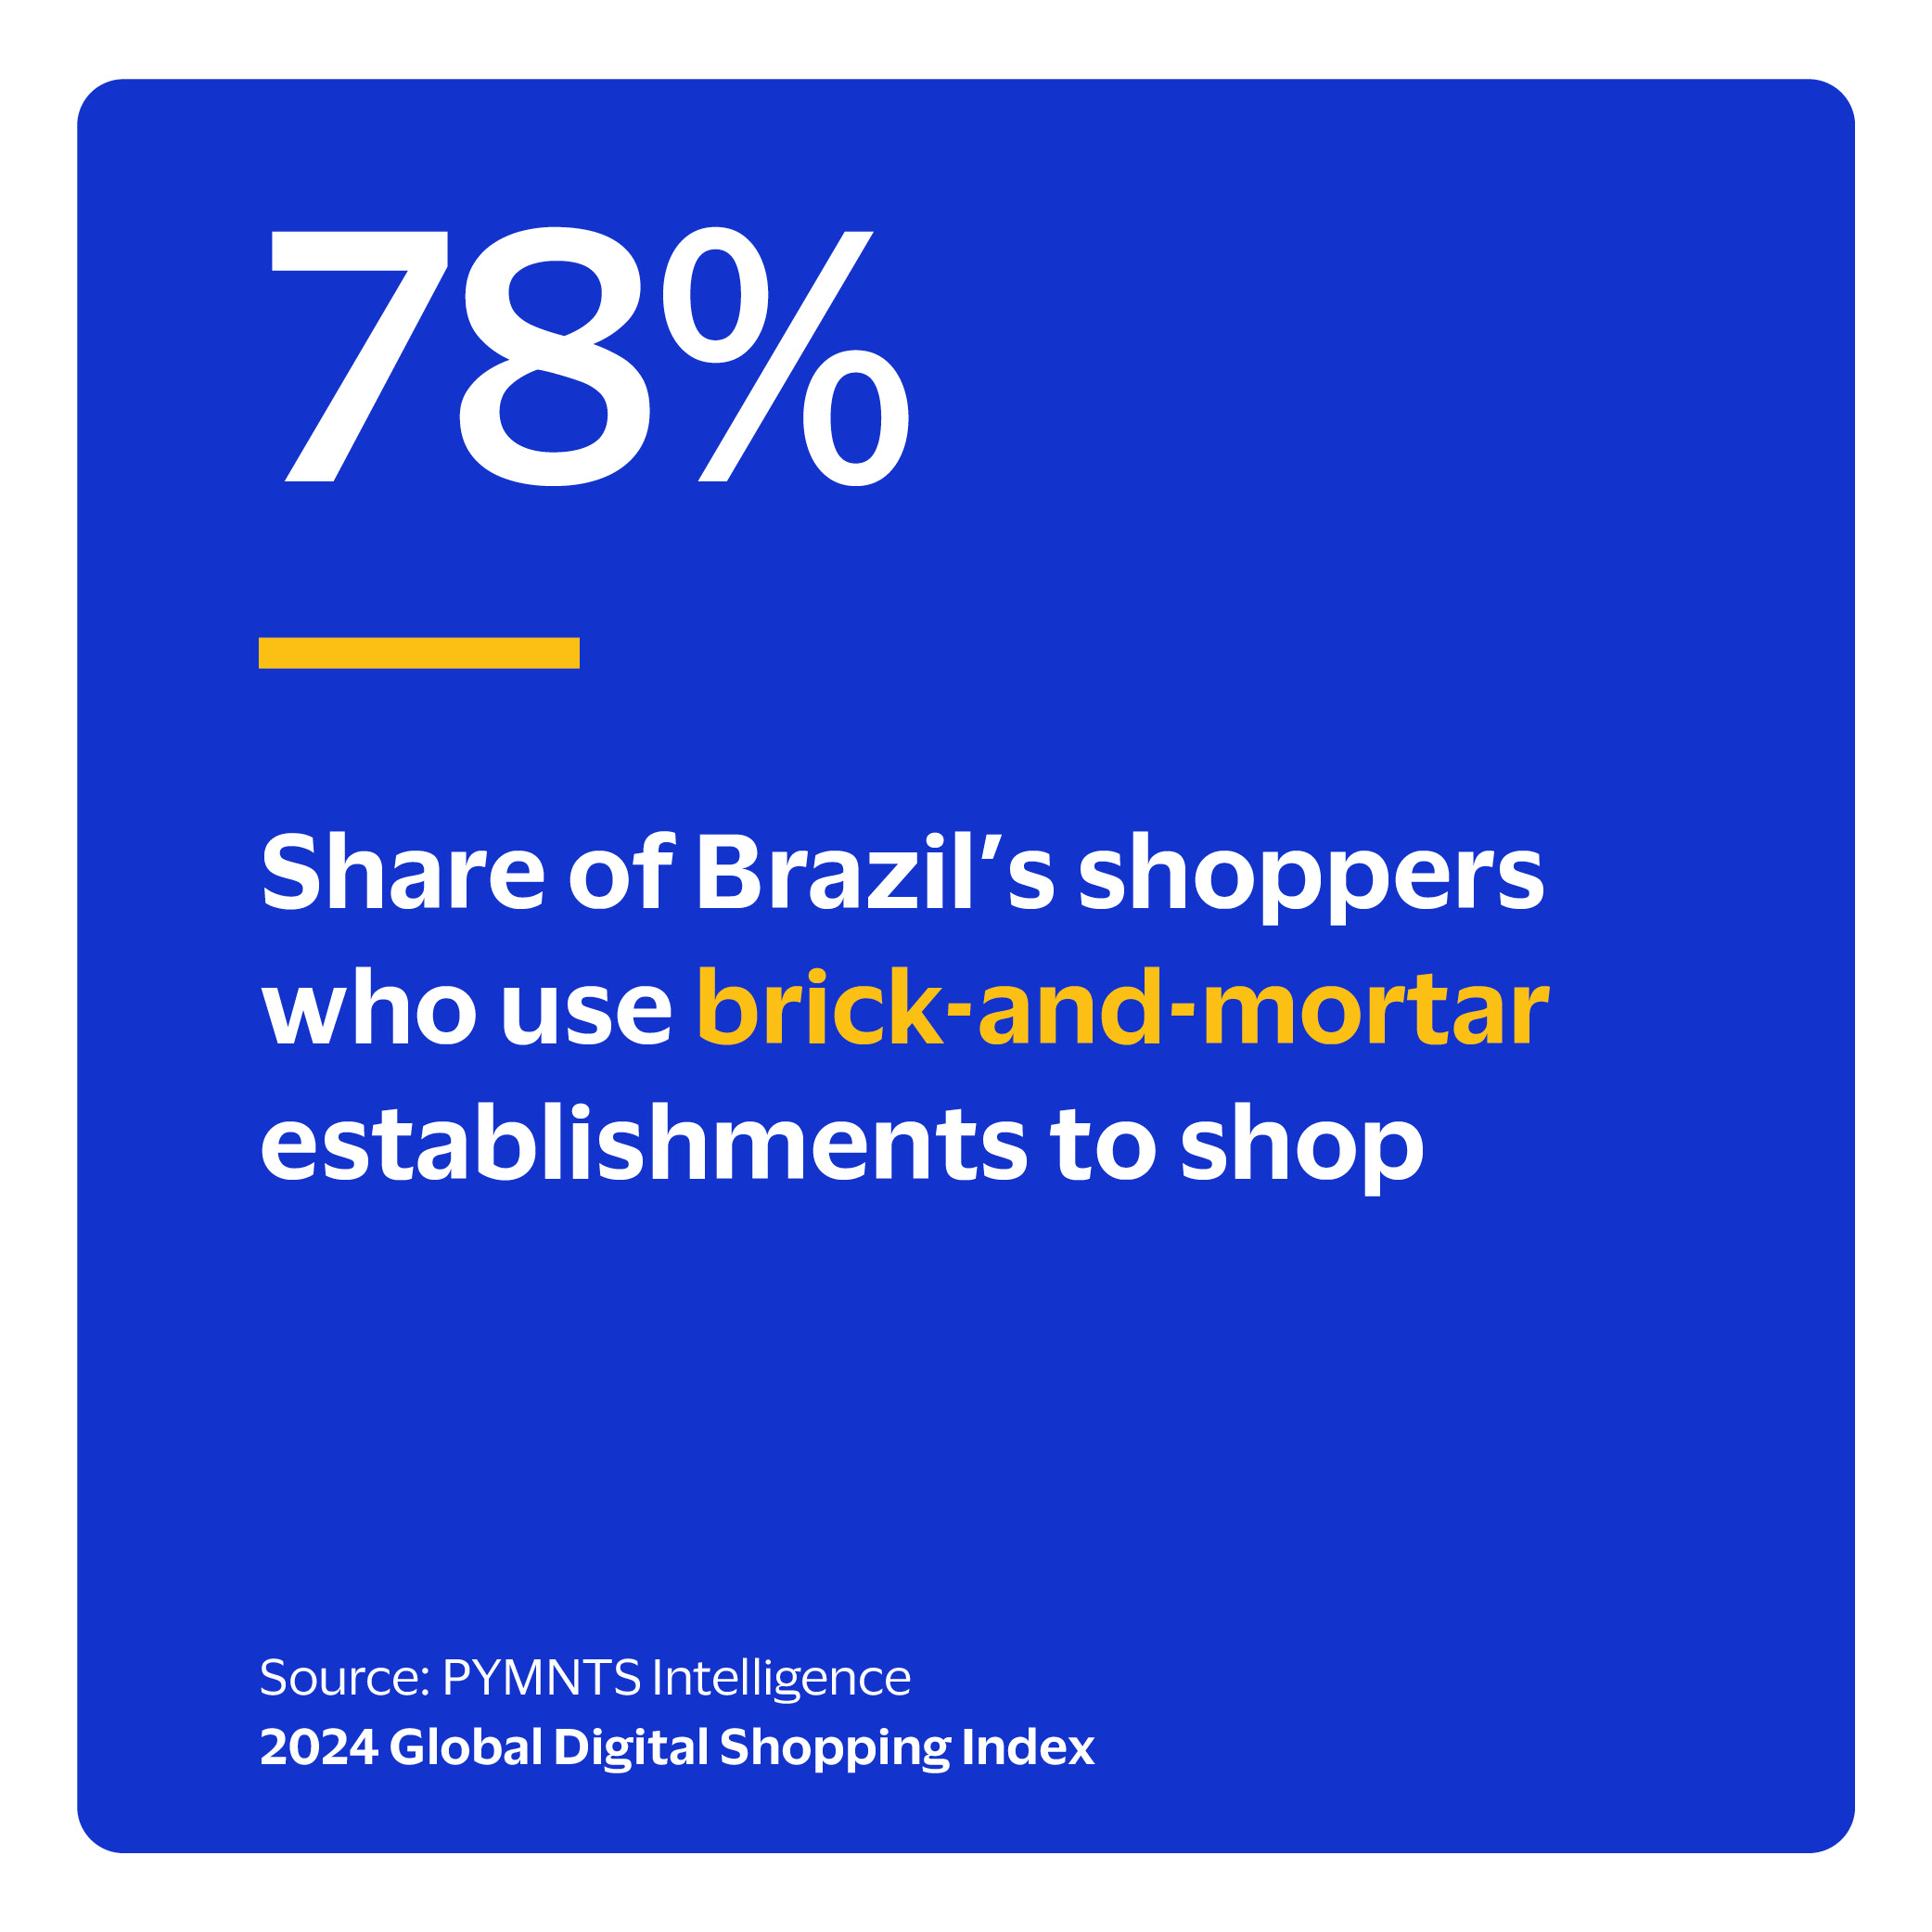  Share of Brazil’s shoppers who use brick-and-mortar establishments to shop